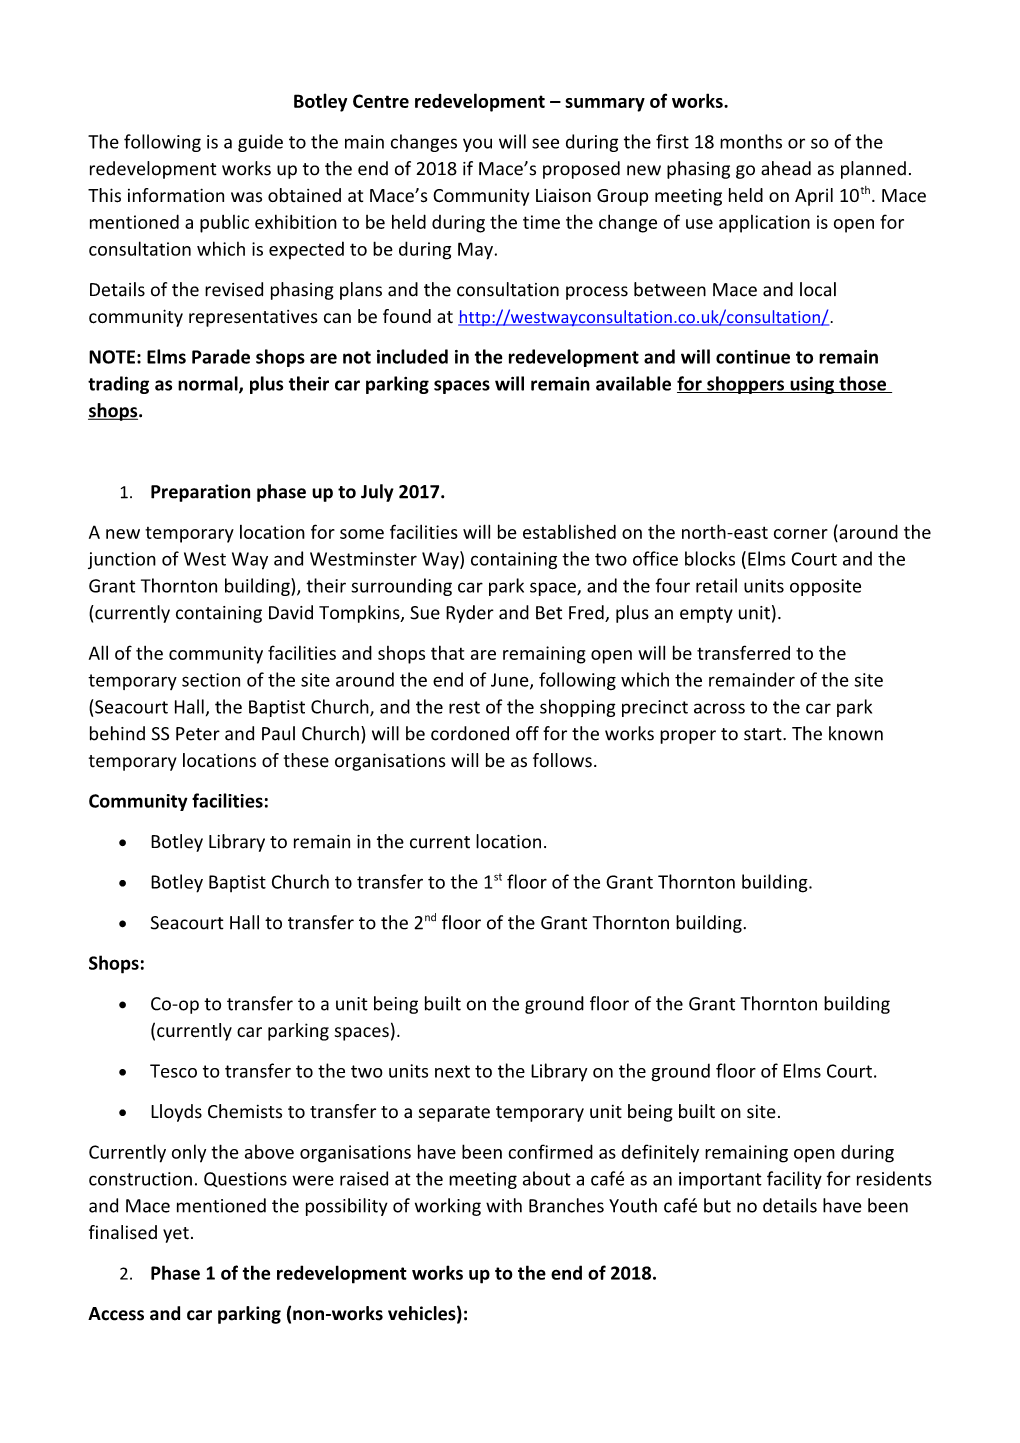 Botley Centre Redevelopment Summary of Works